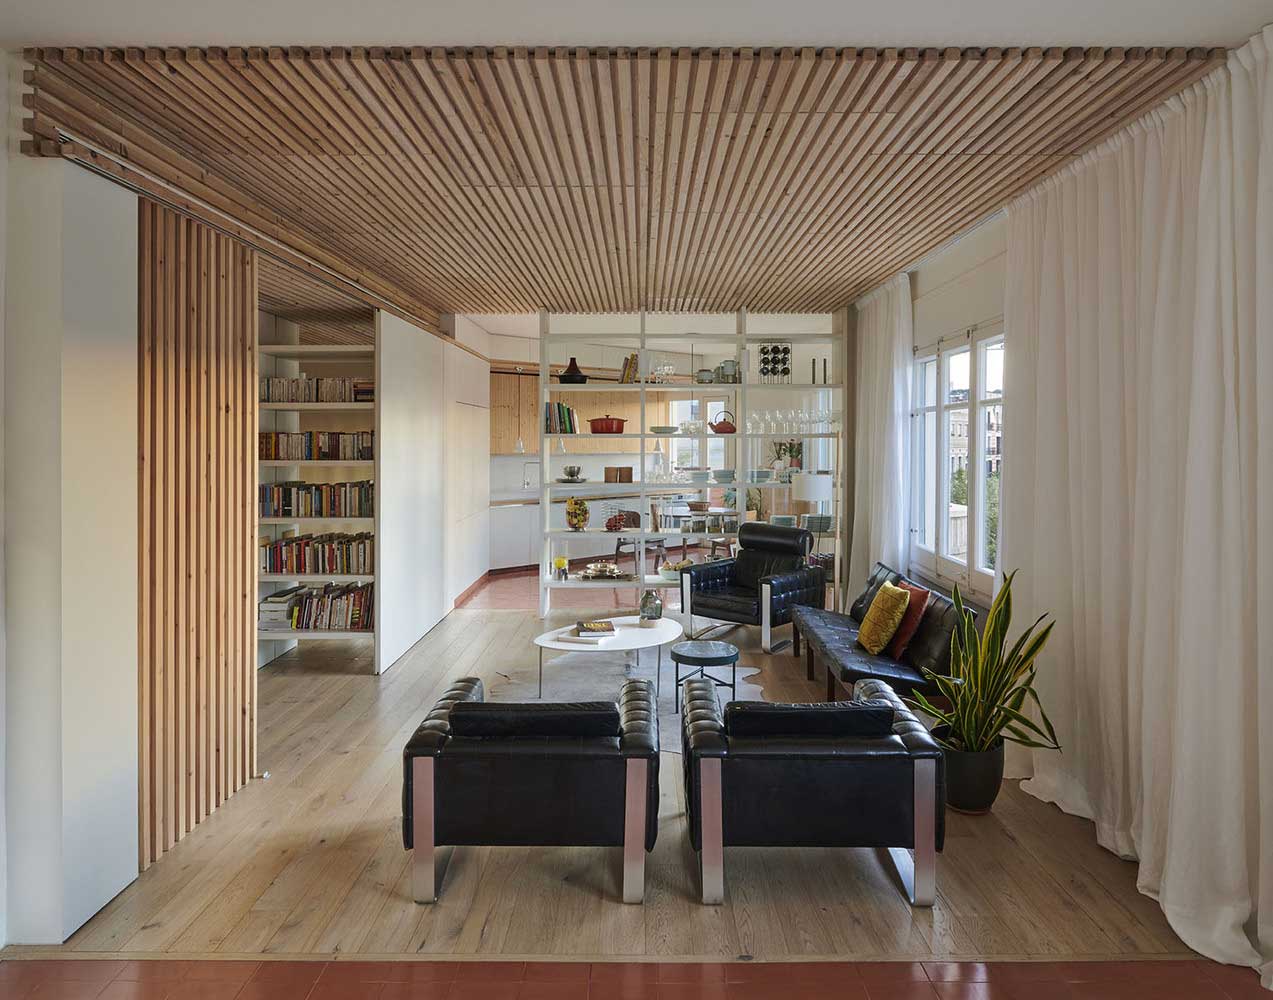 wooden slats in the interior: images